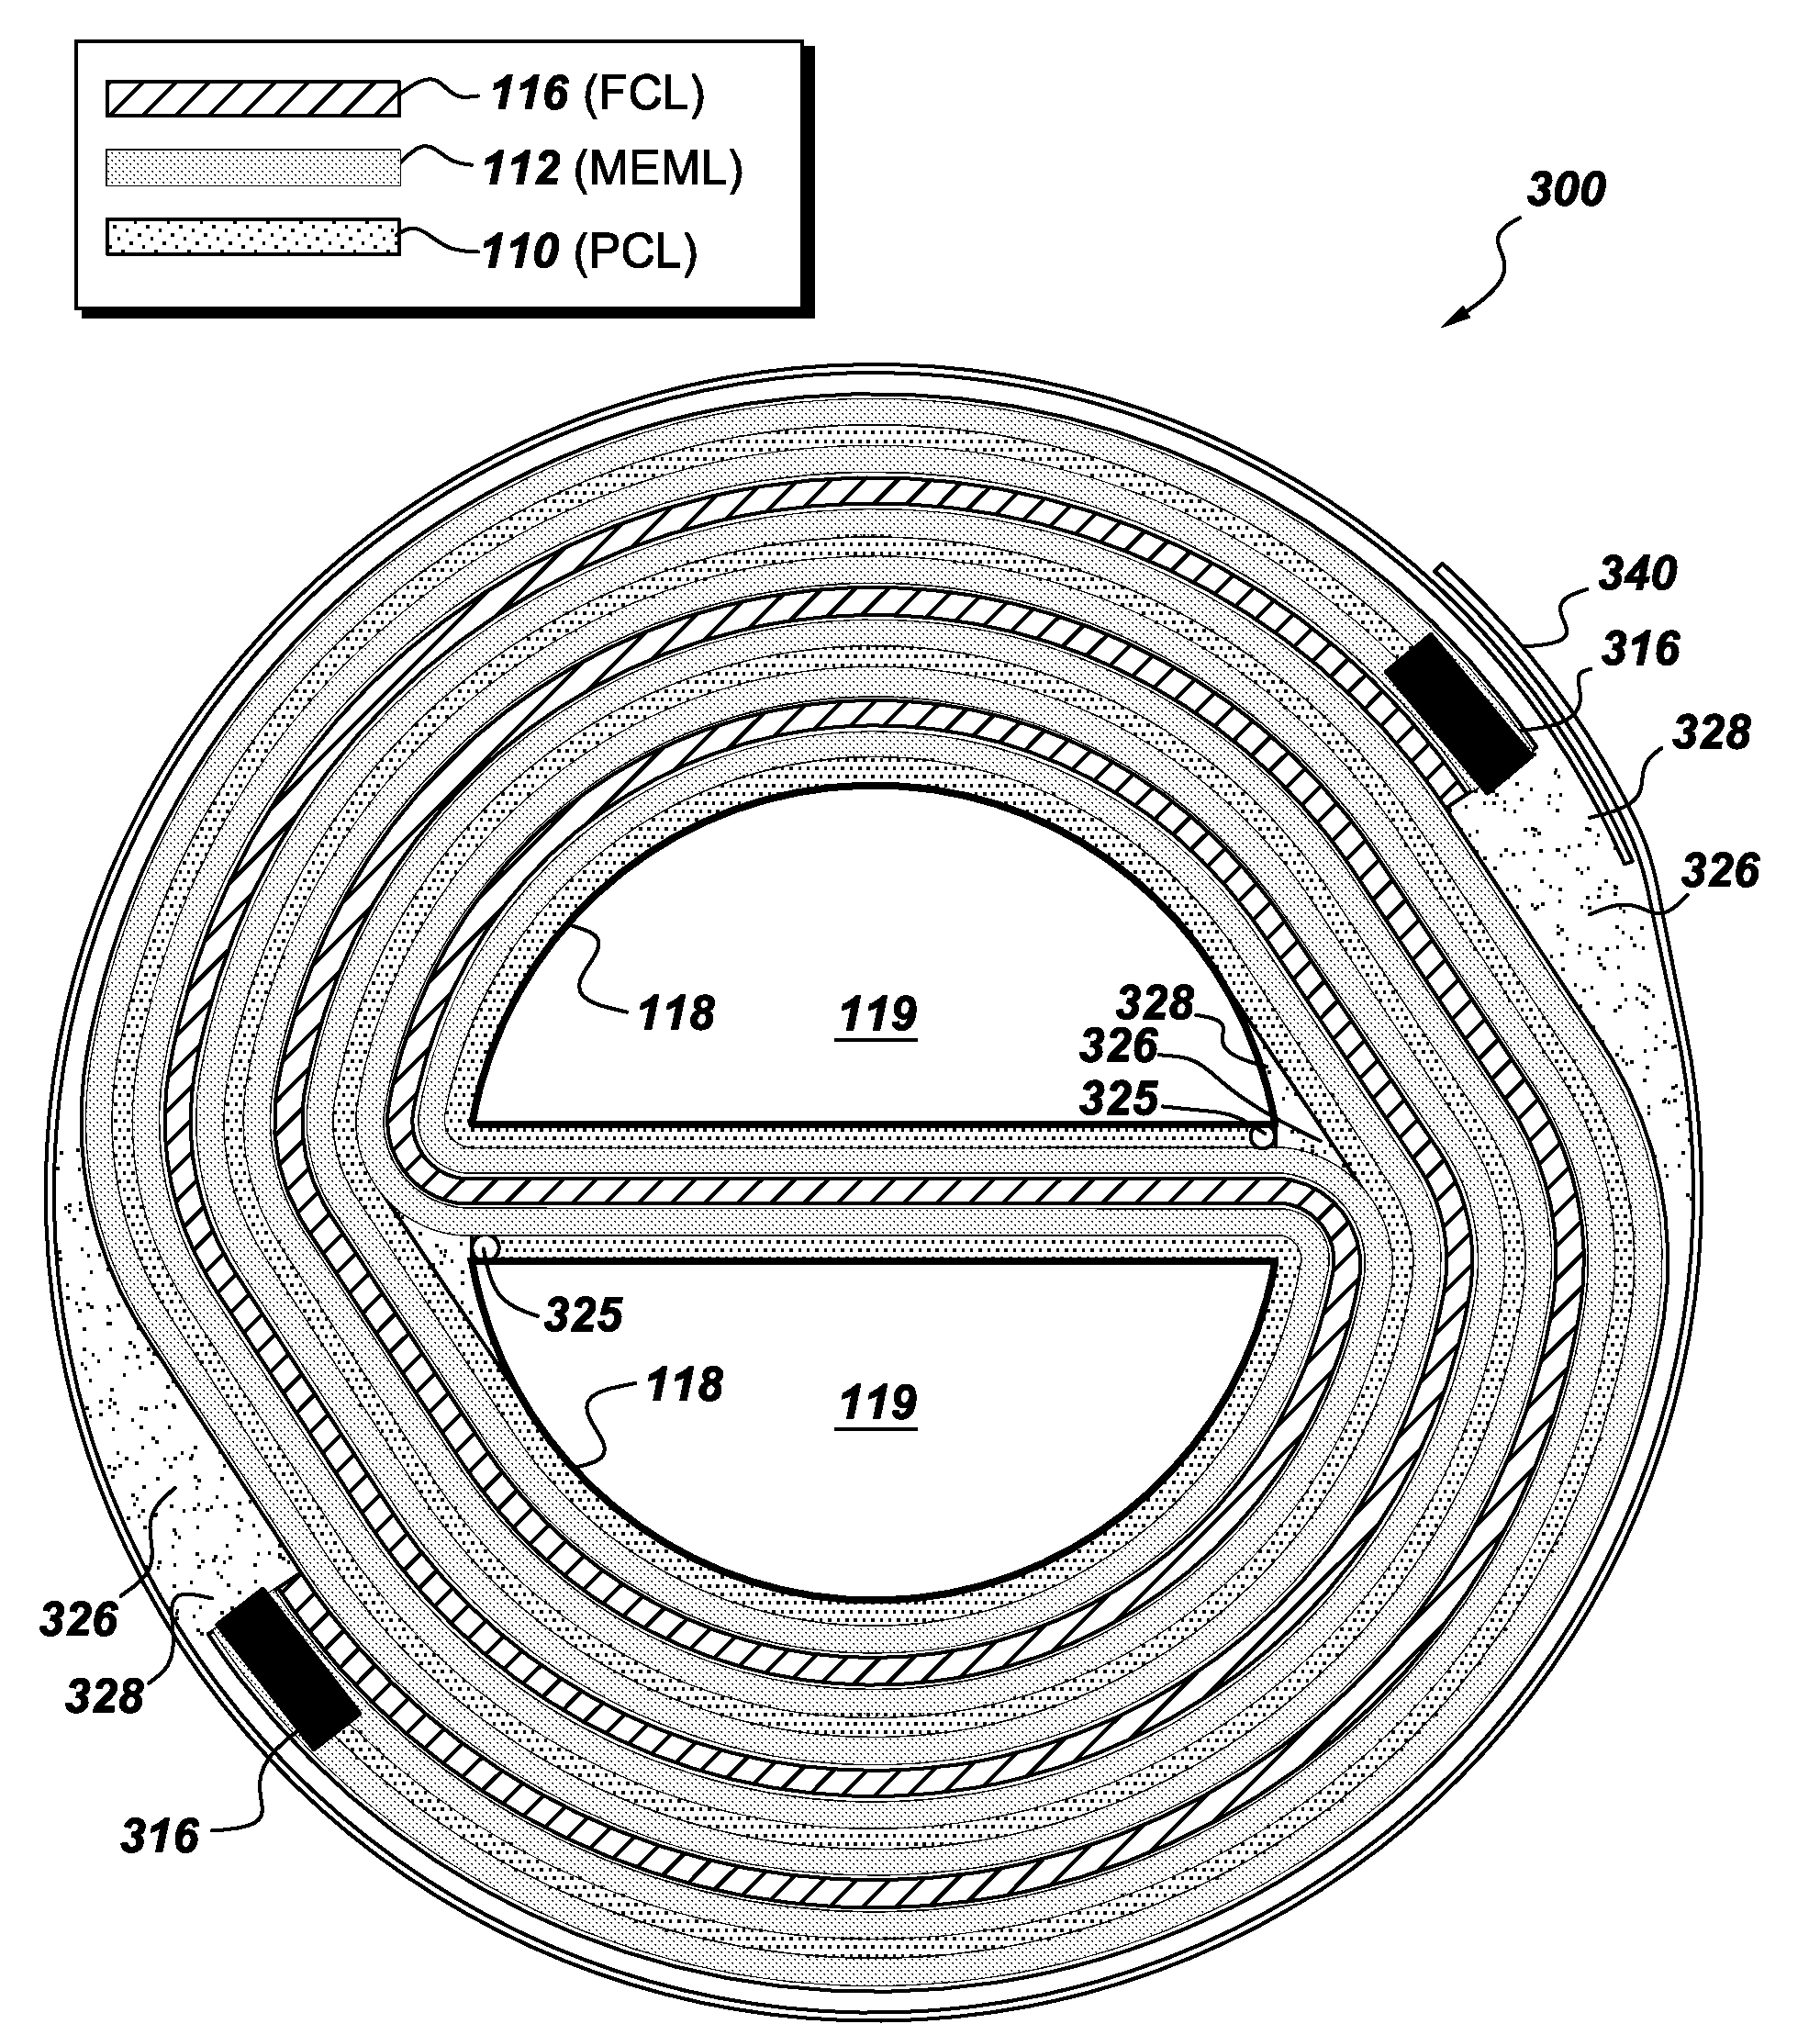 Central core element for a separator assembly